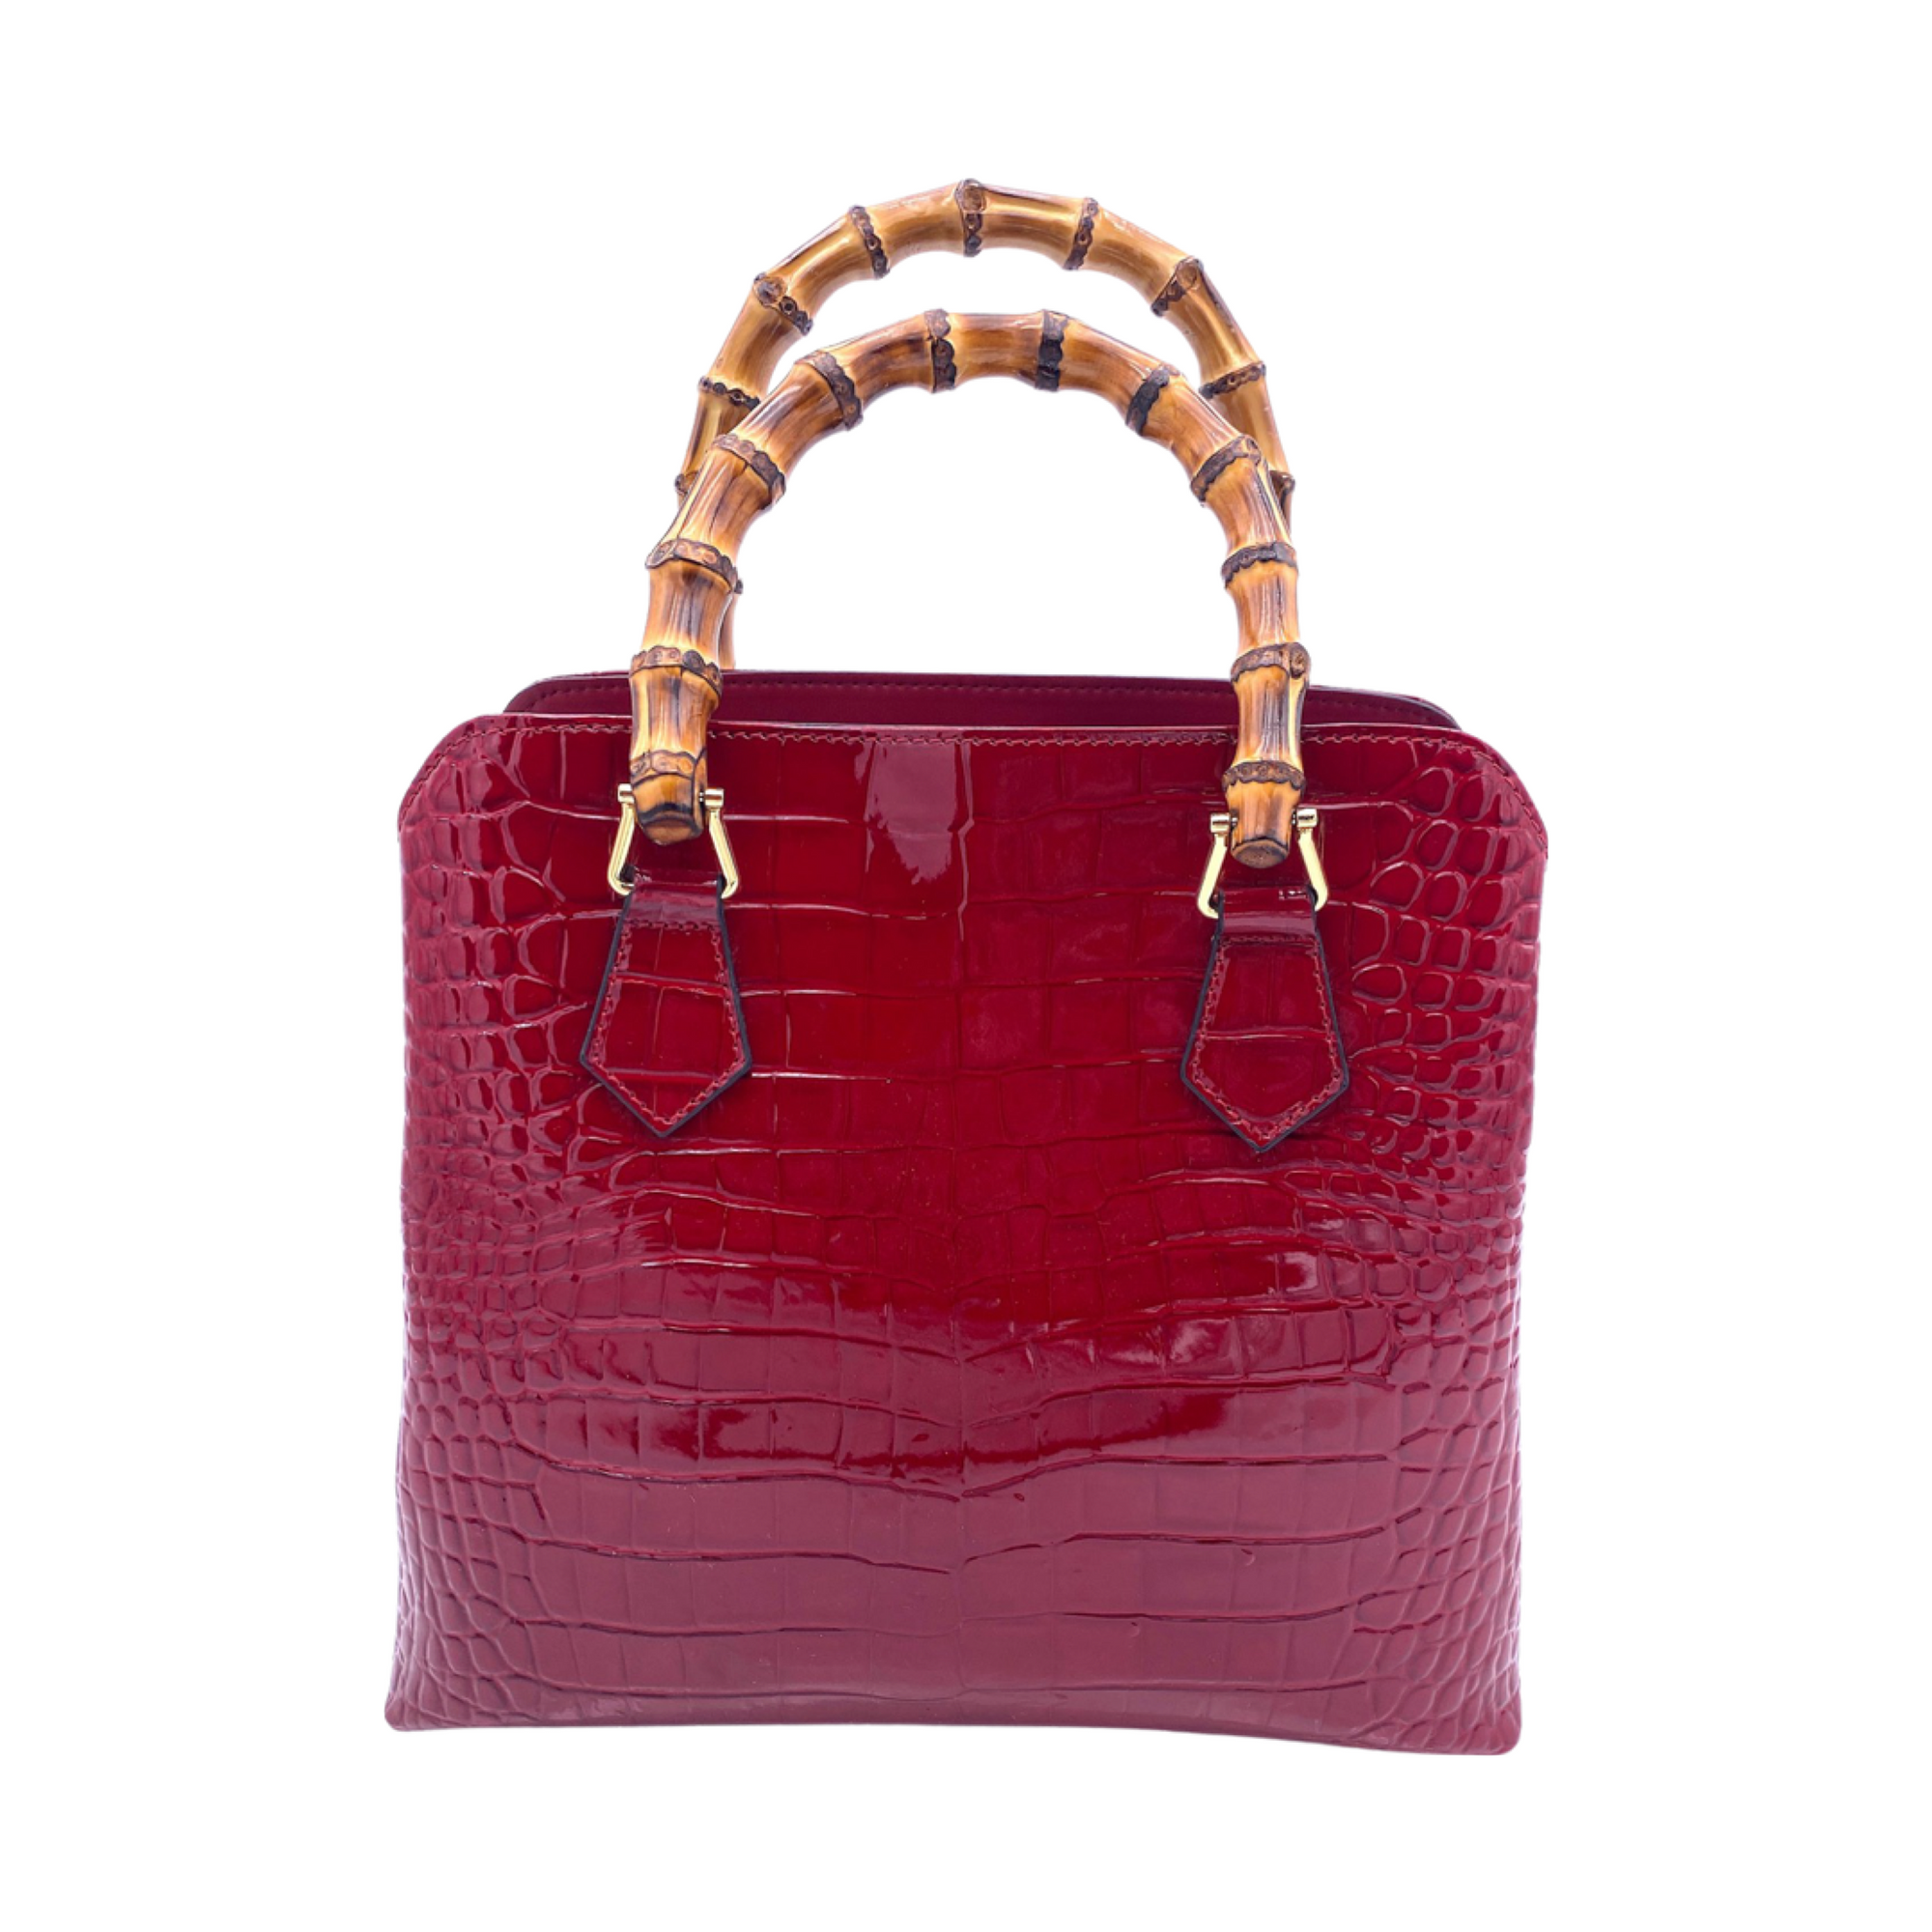 Millie Bag in Candy Apple